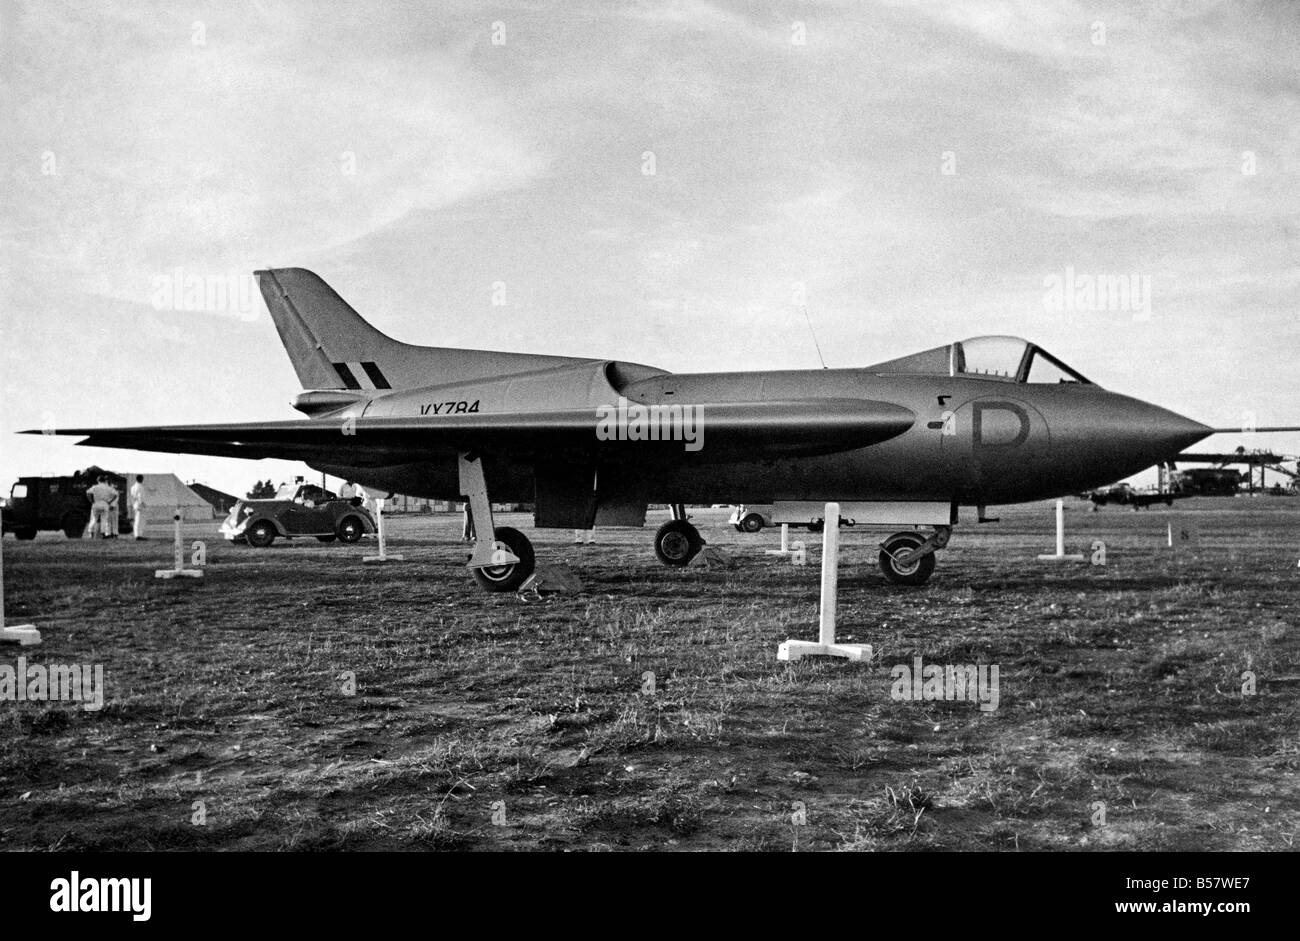 At the Society of British Aircraft Constructors' Flying Display at Farnborough, Hampshire, today a plane taken off the Secret List only this morning made a last minute appearance at 6.30 this evening. It was the Avro 707, an experimental jet propelled aircraft which flew across the airfield at a very high speed before landing. September 1949 P004658 Stock Photo